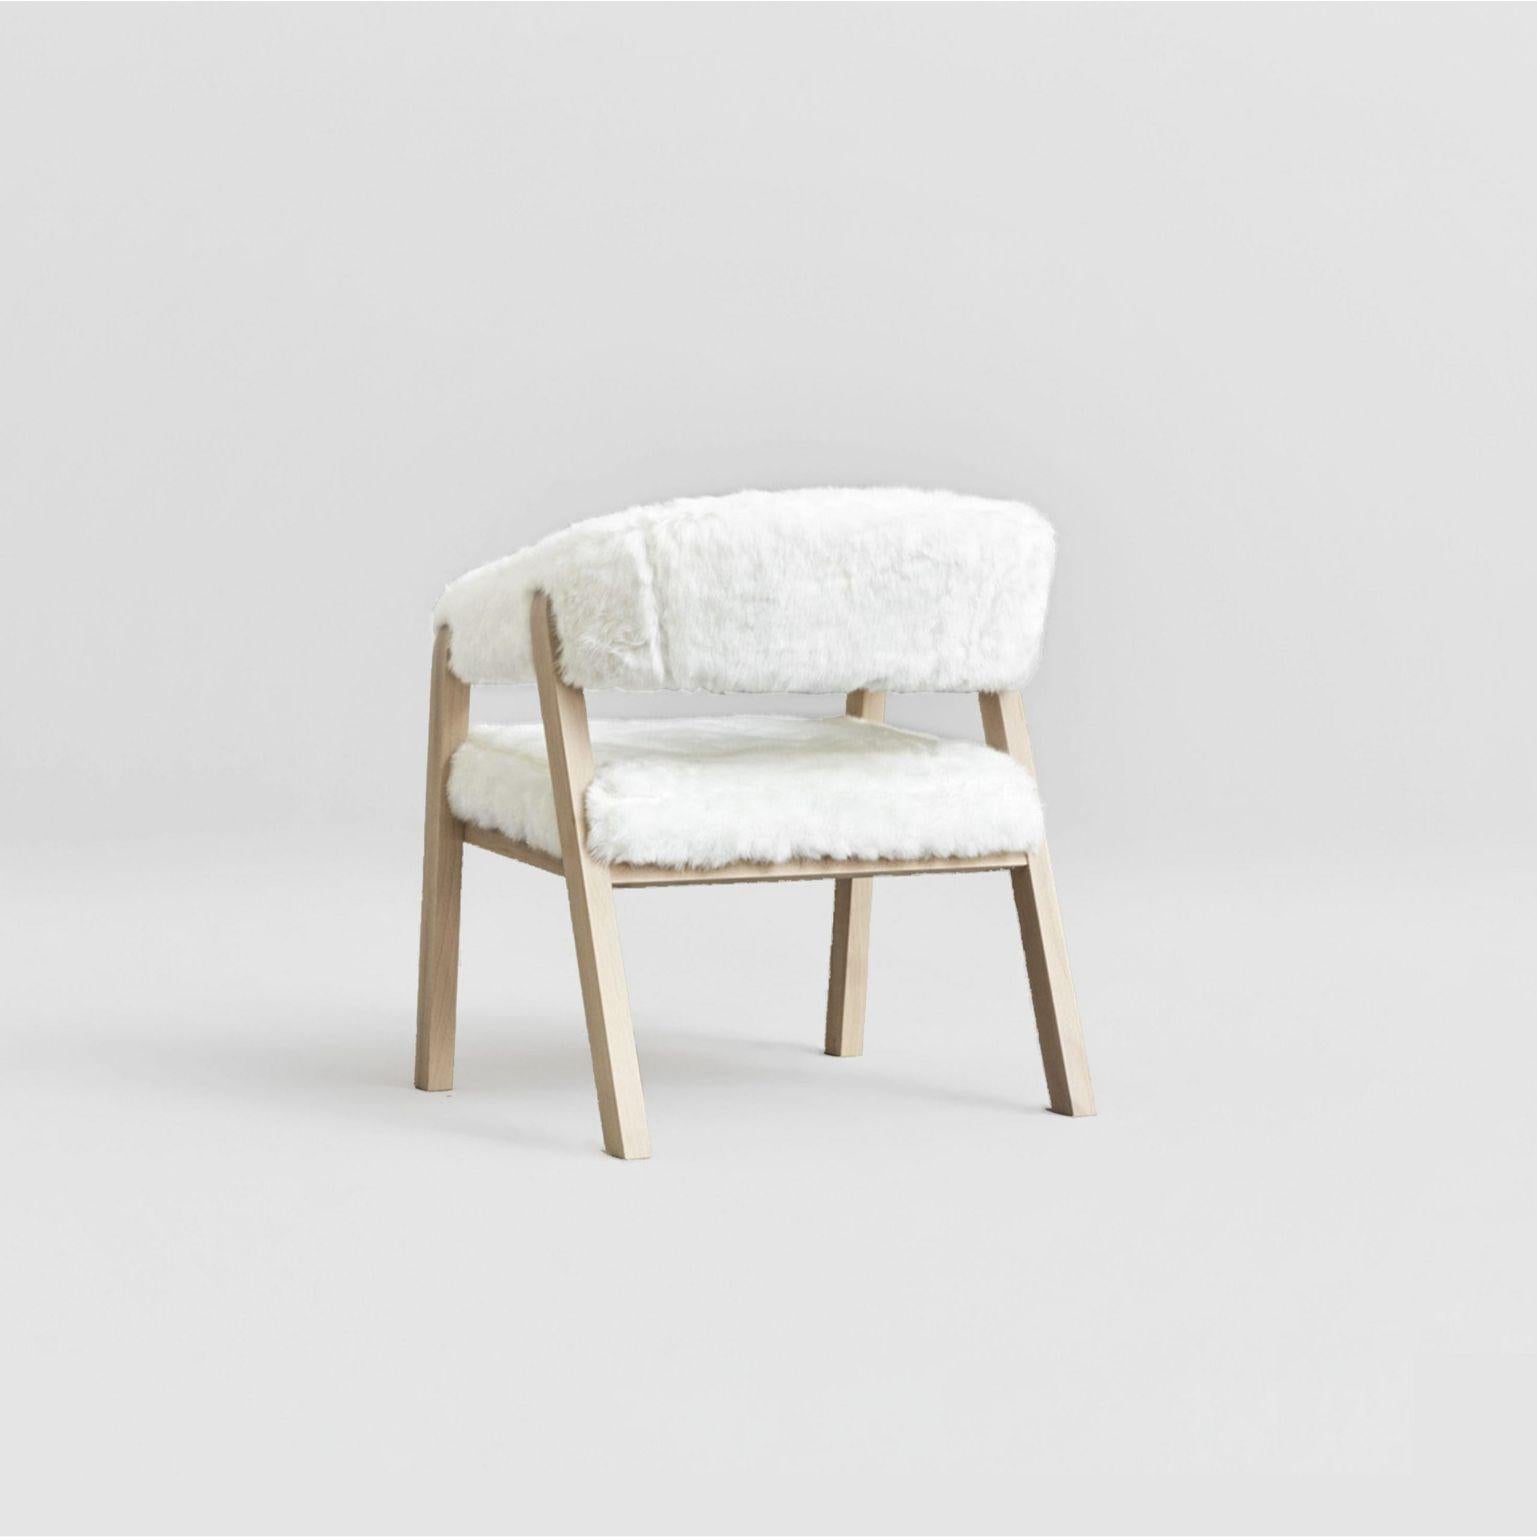 Pair of oslo armchair arctic fox throw by Pepe Albargues
Dimensions: W 65, D 60, H 73, seat 44
Materials: beech wood structure.
Foam CMHR (high resilience and flame retardant) for all our cushion filling systems

Also available: Variations of